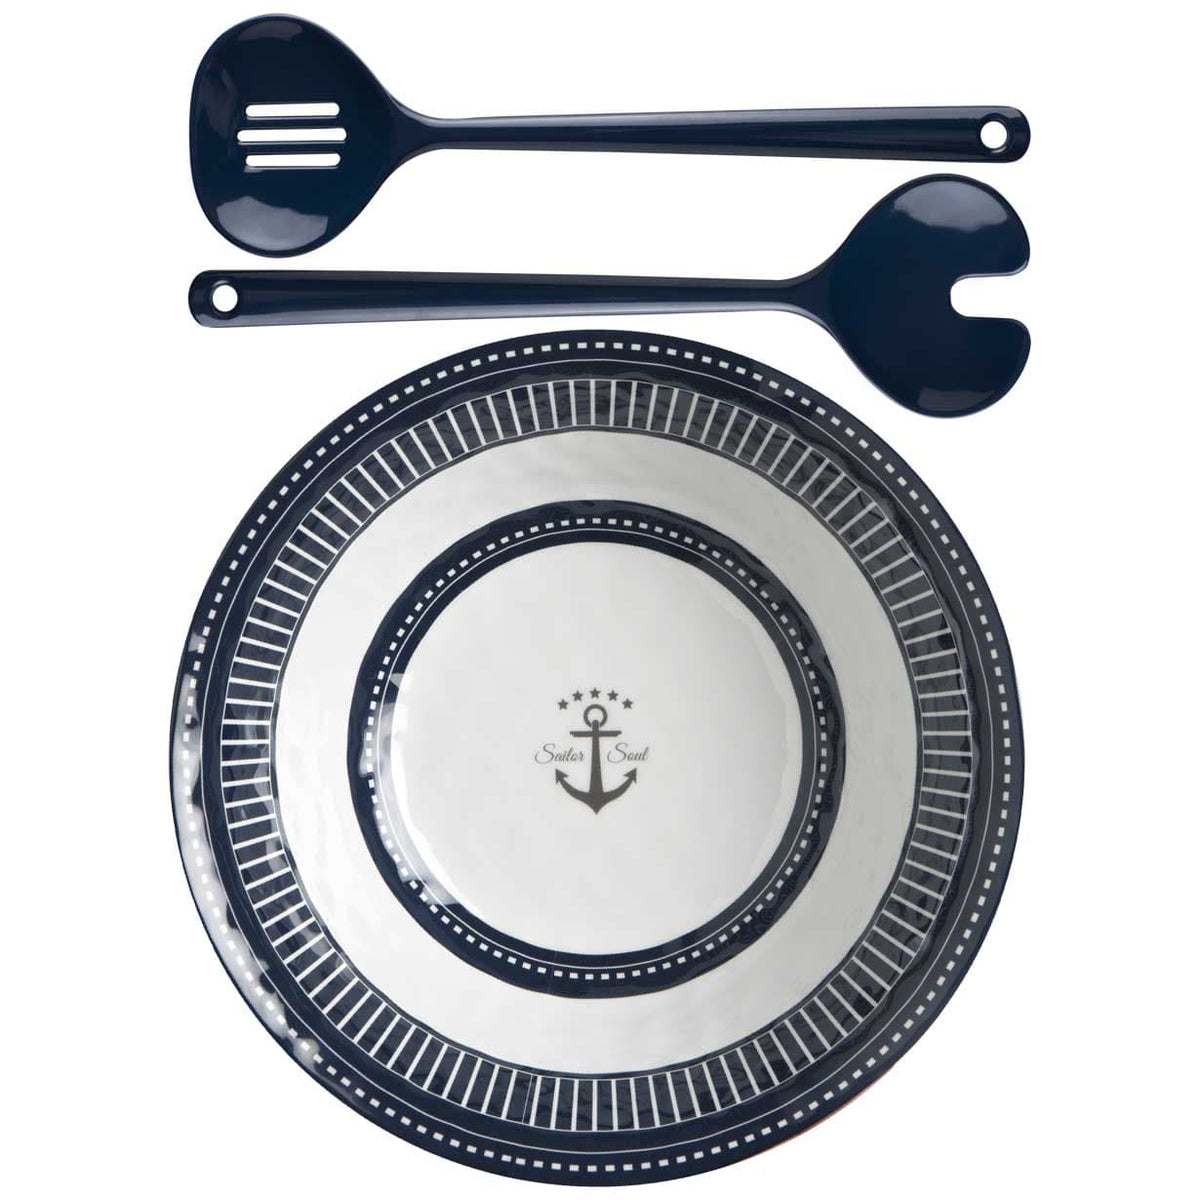 Marine Business Qualifies for Free Shipping Marine Business Sailor Soul Salad Bowl & Cutlery #14008